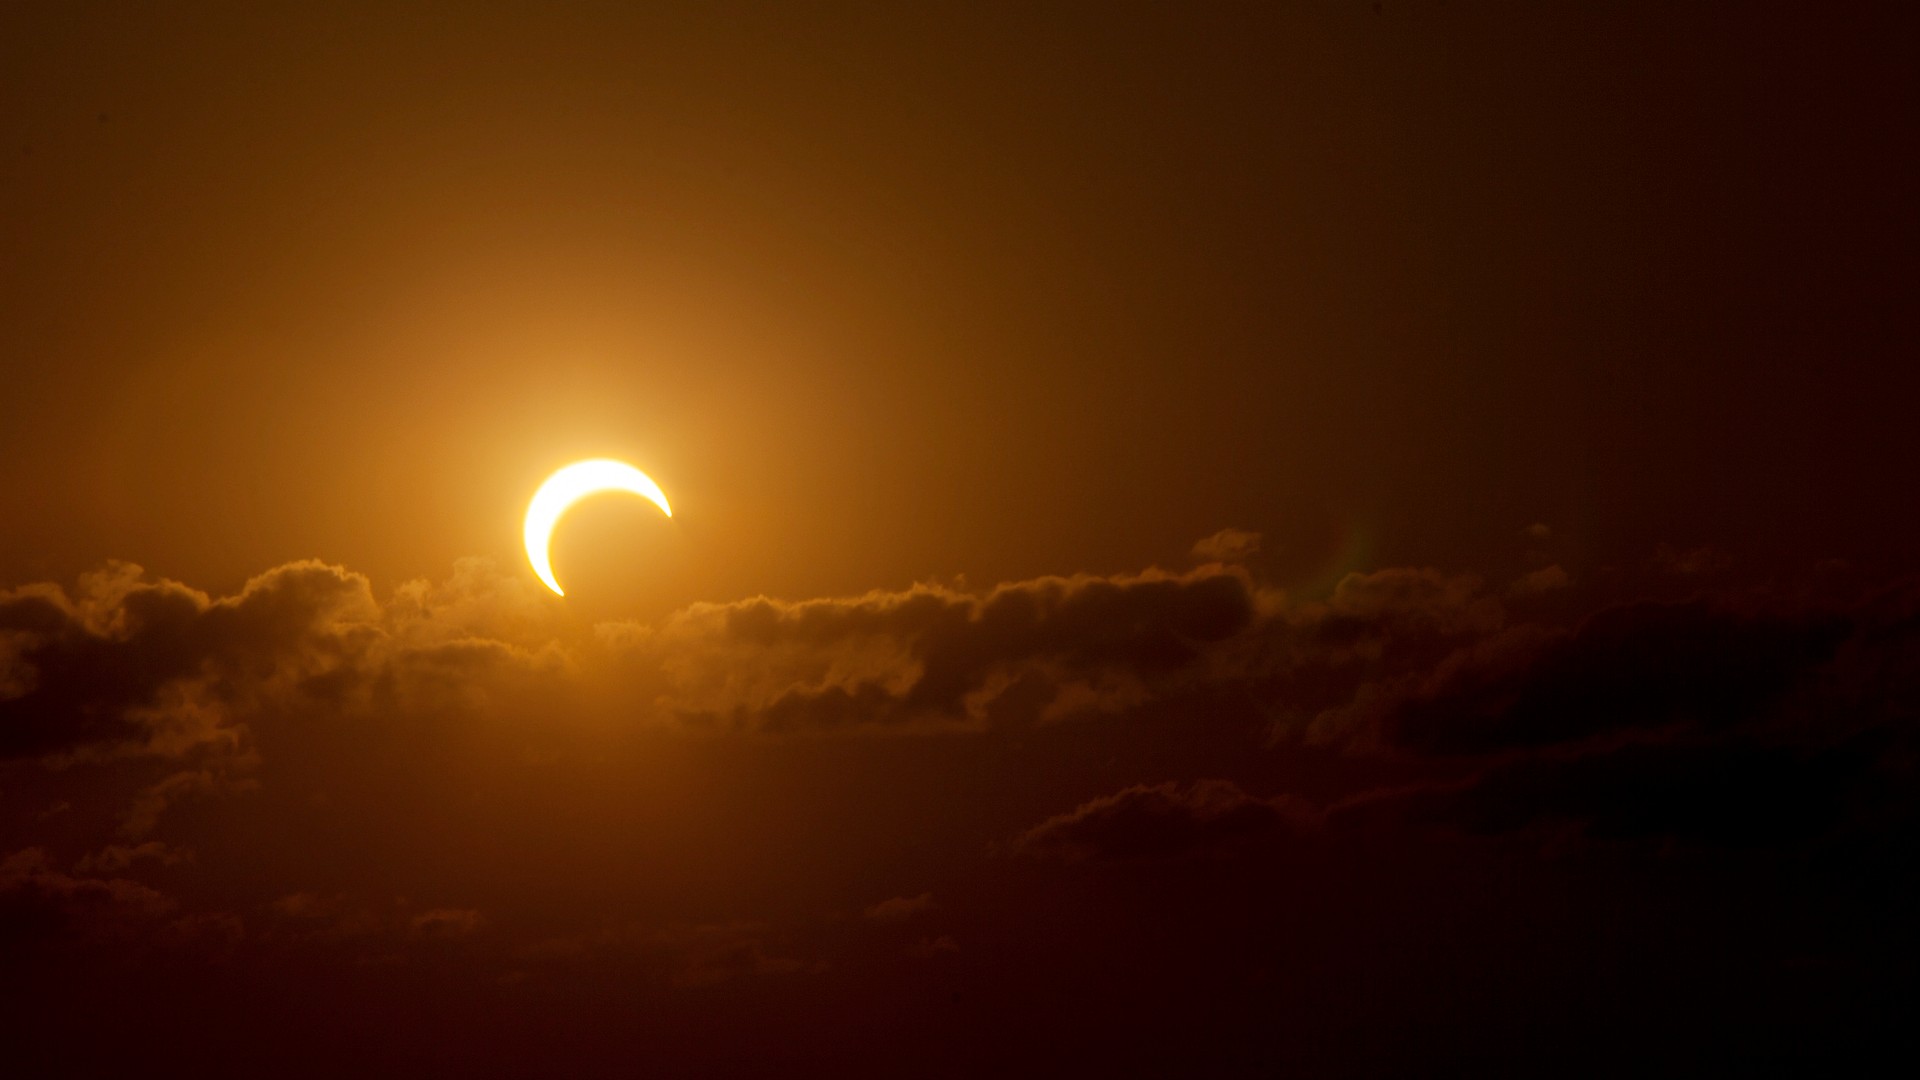 A photograph of a partial solar eclipse seen above the clouds.